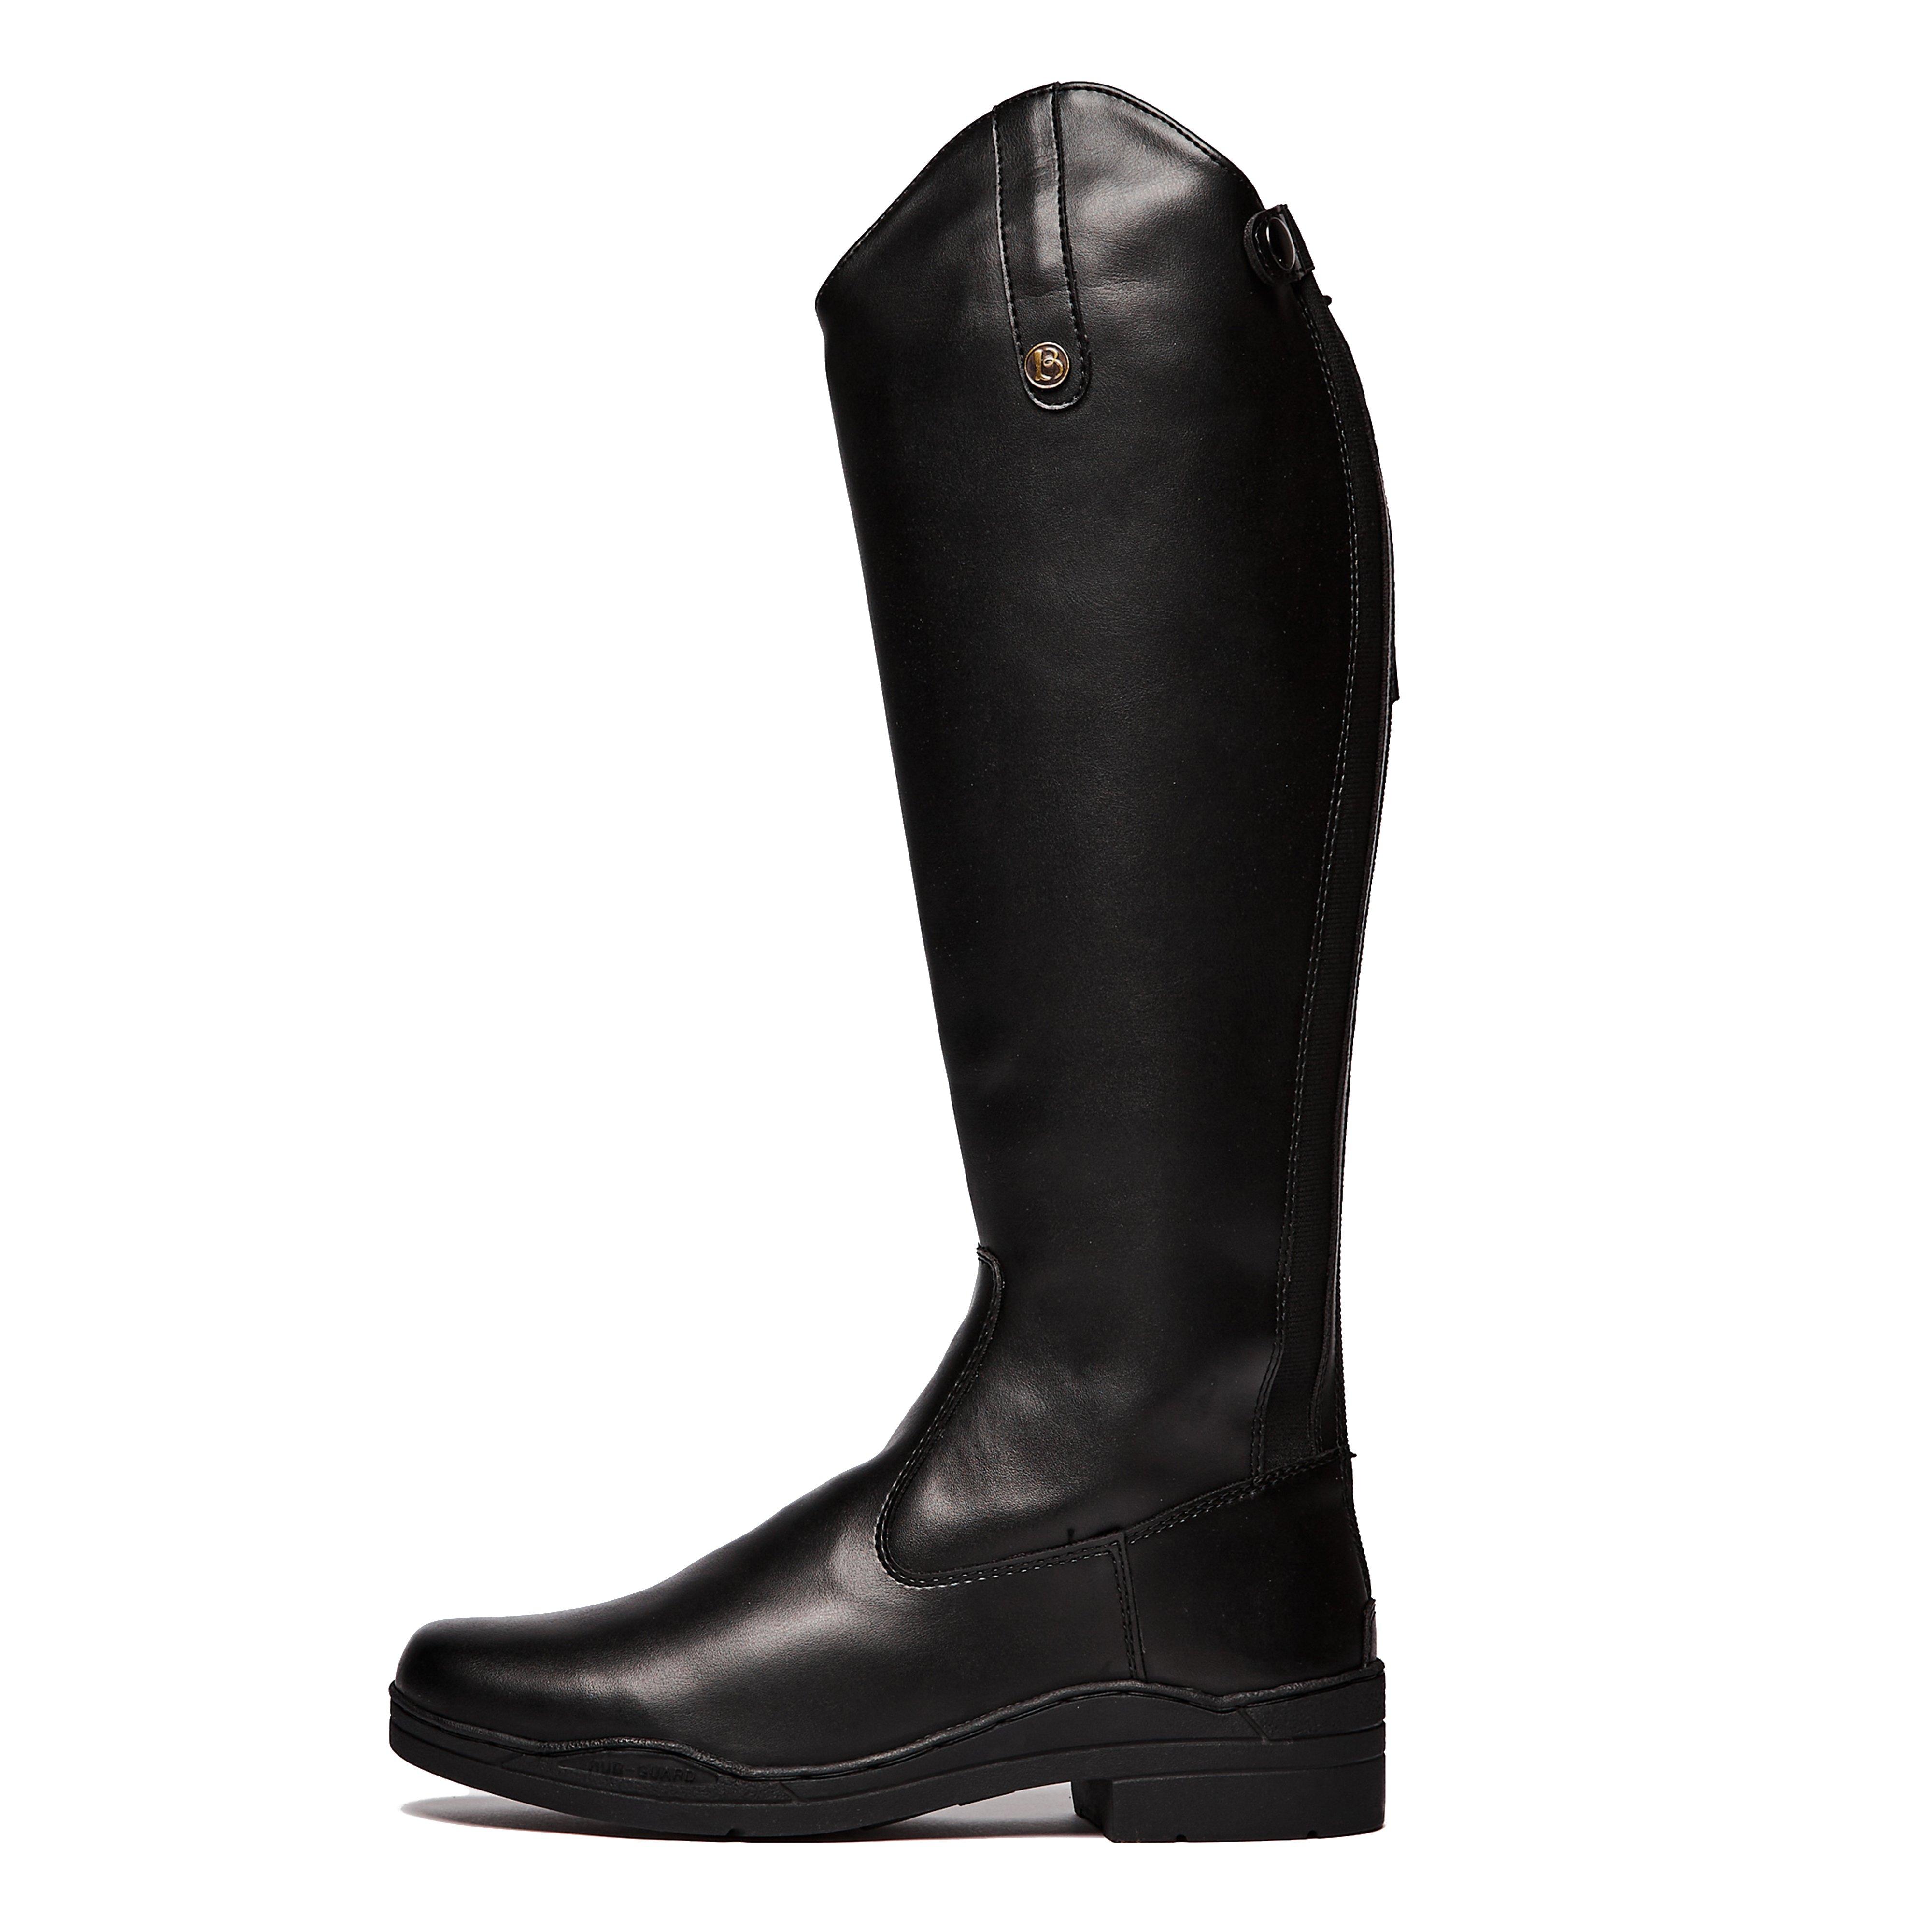 Womens Modena Synthetic Dress Riding Boots Black